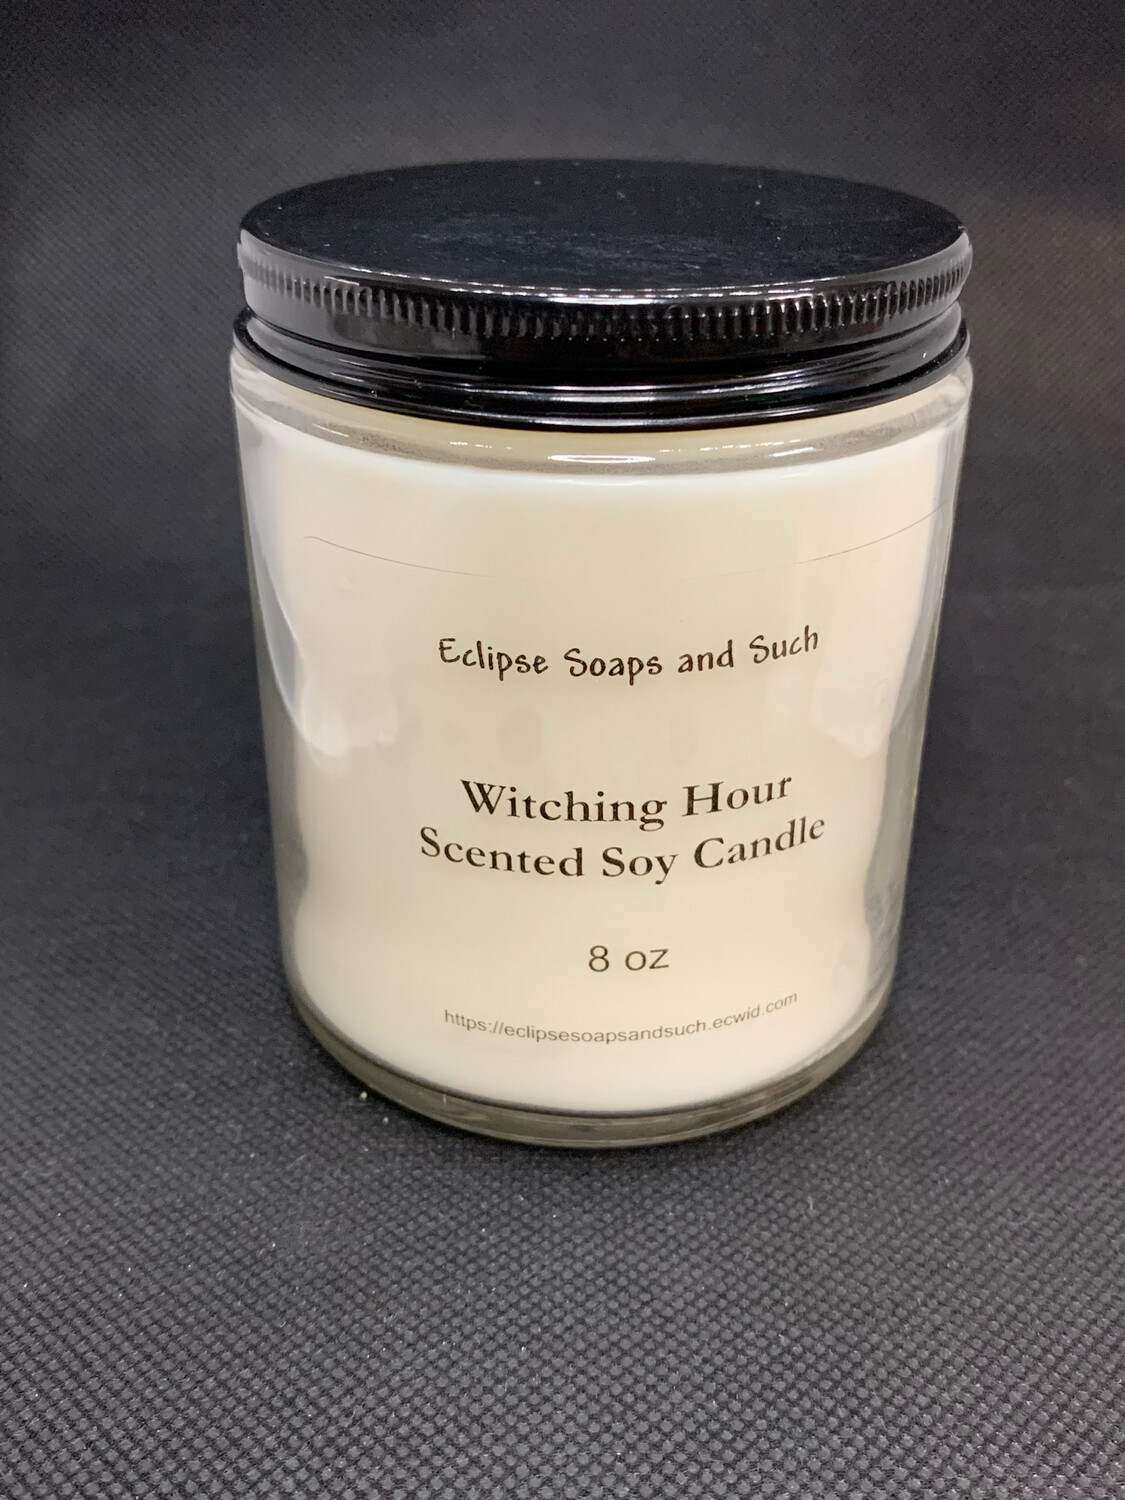 Witching Hour Scented Soy Candle 8oz